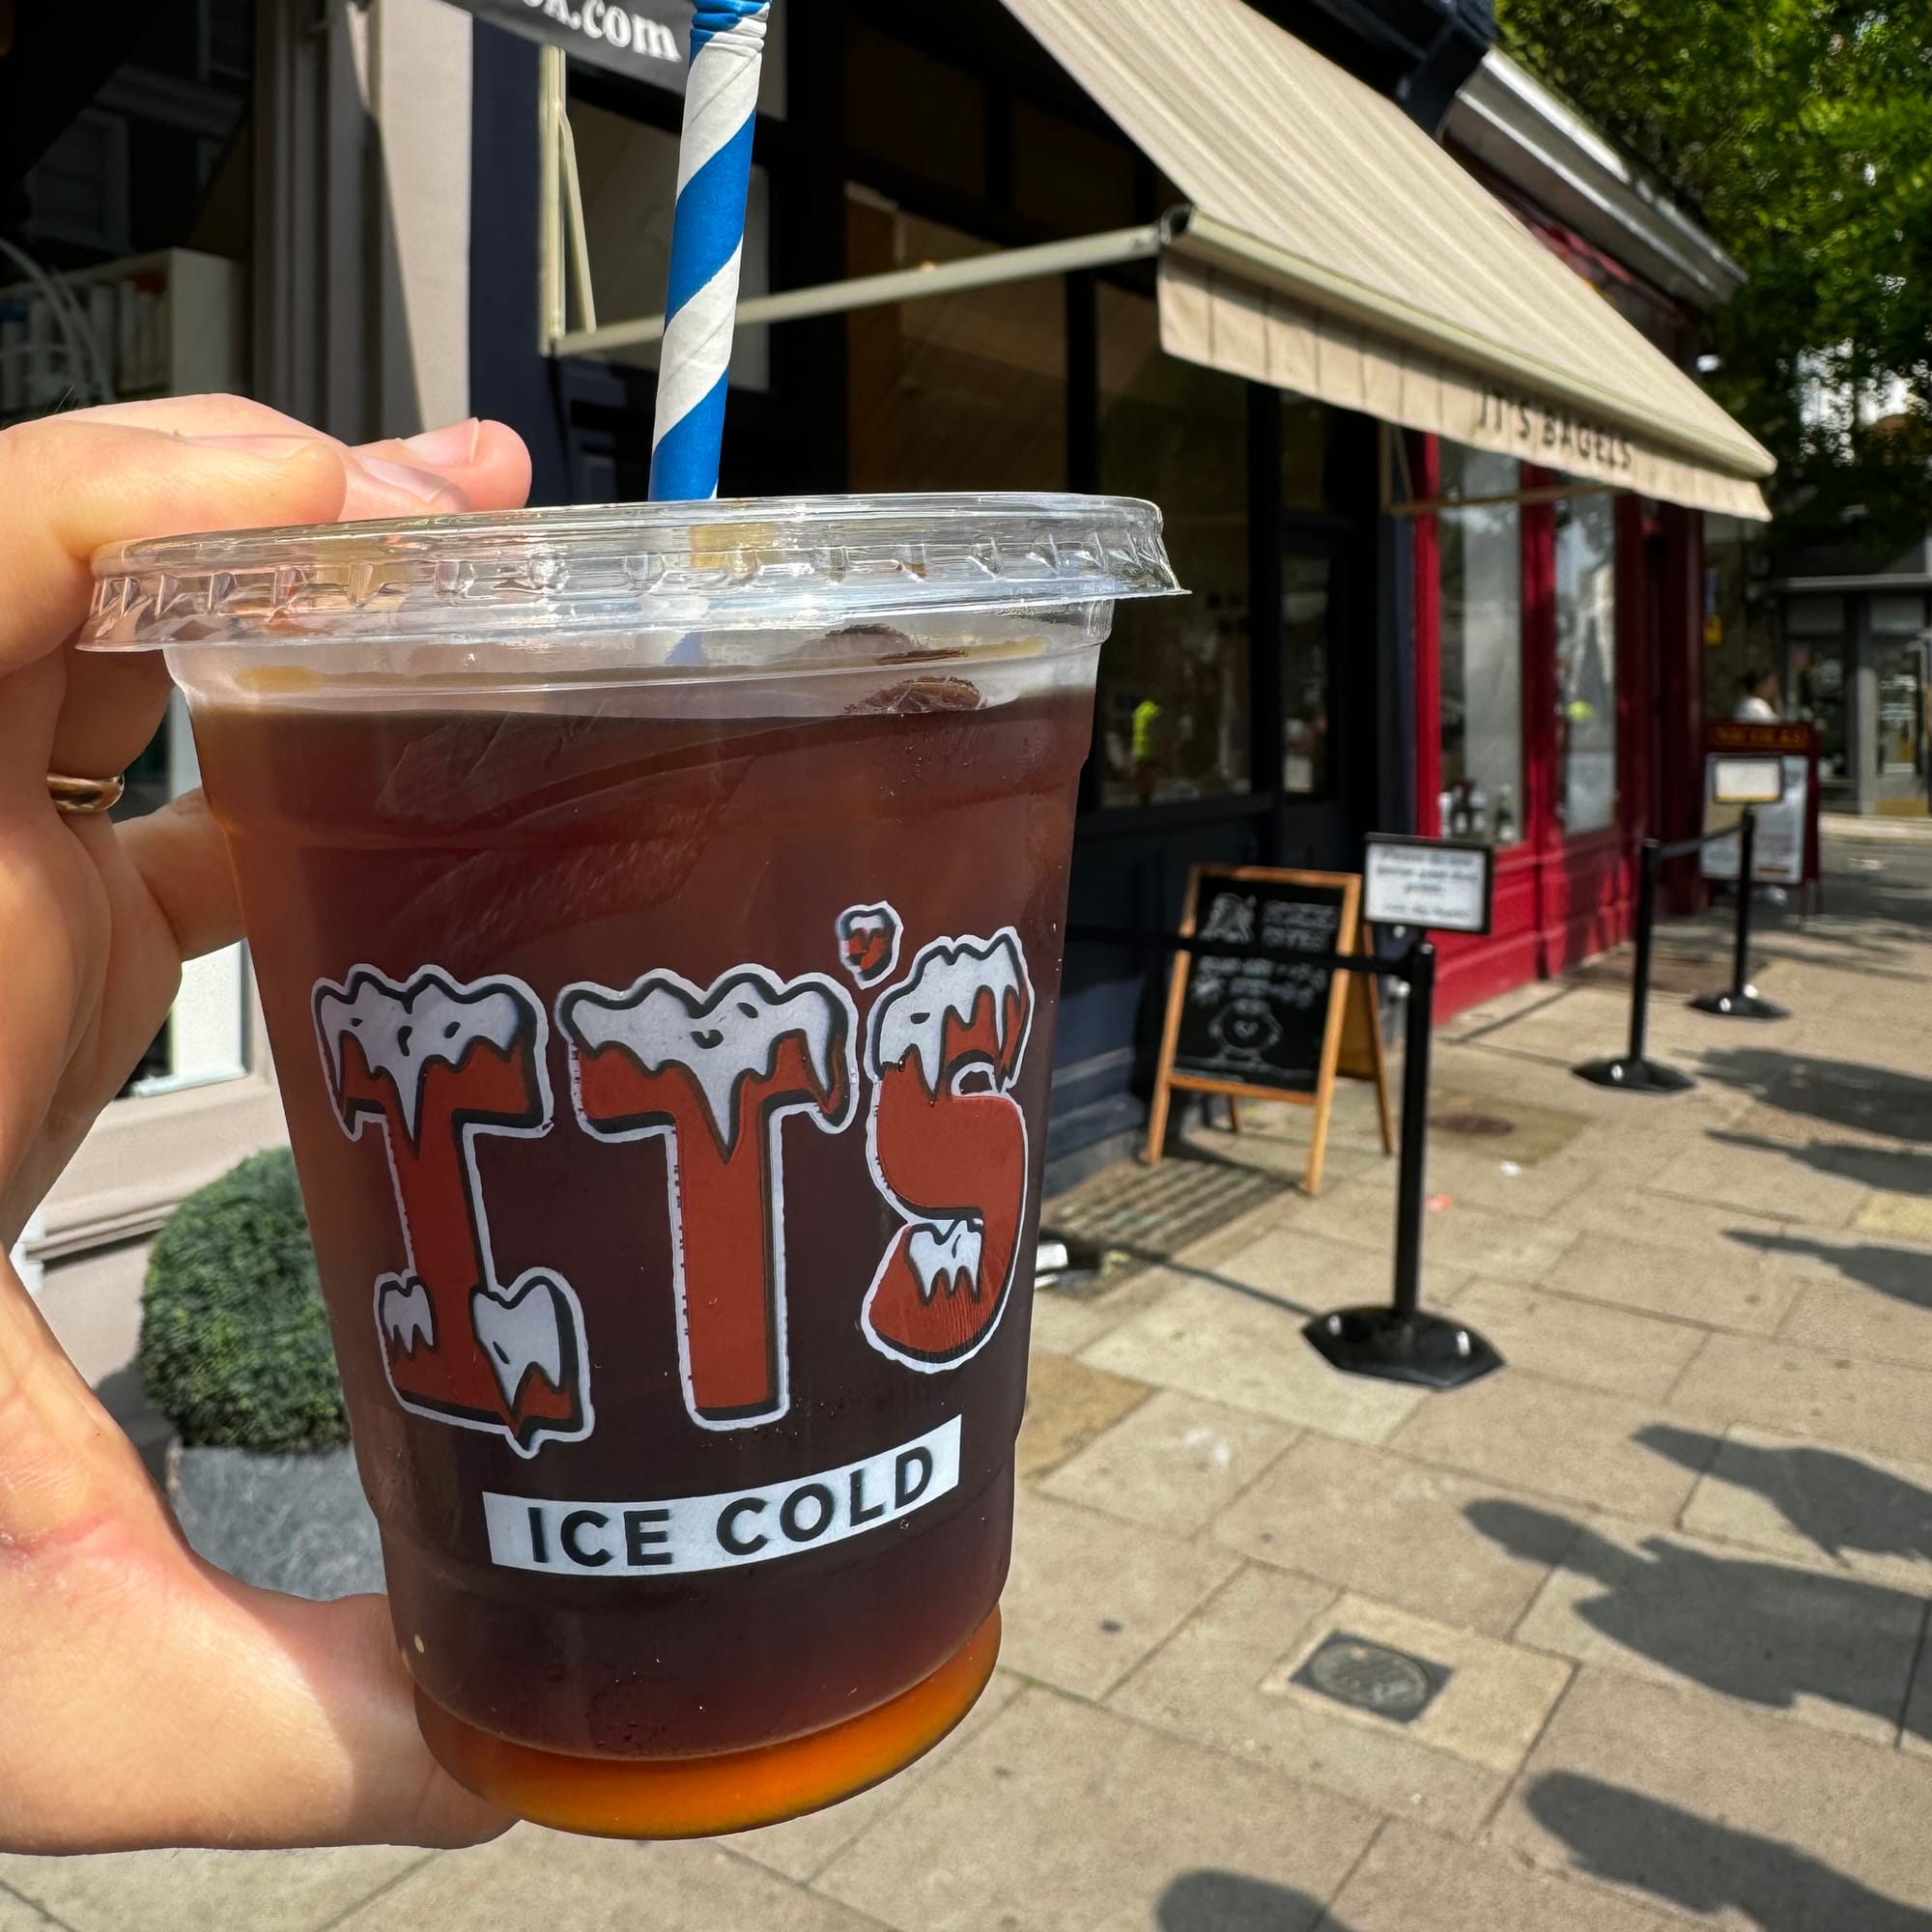 A plastic cup filled with iced coffee. Branding on the side reads "It's Ice Cold"